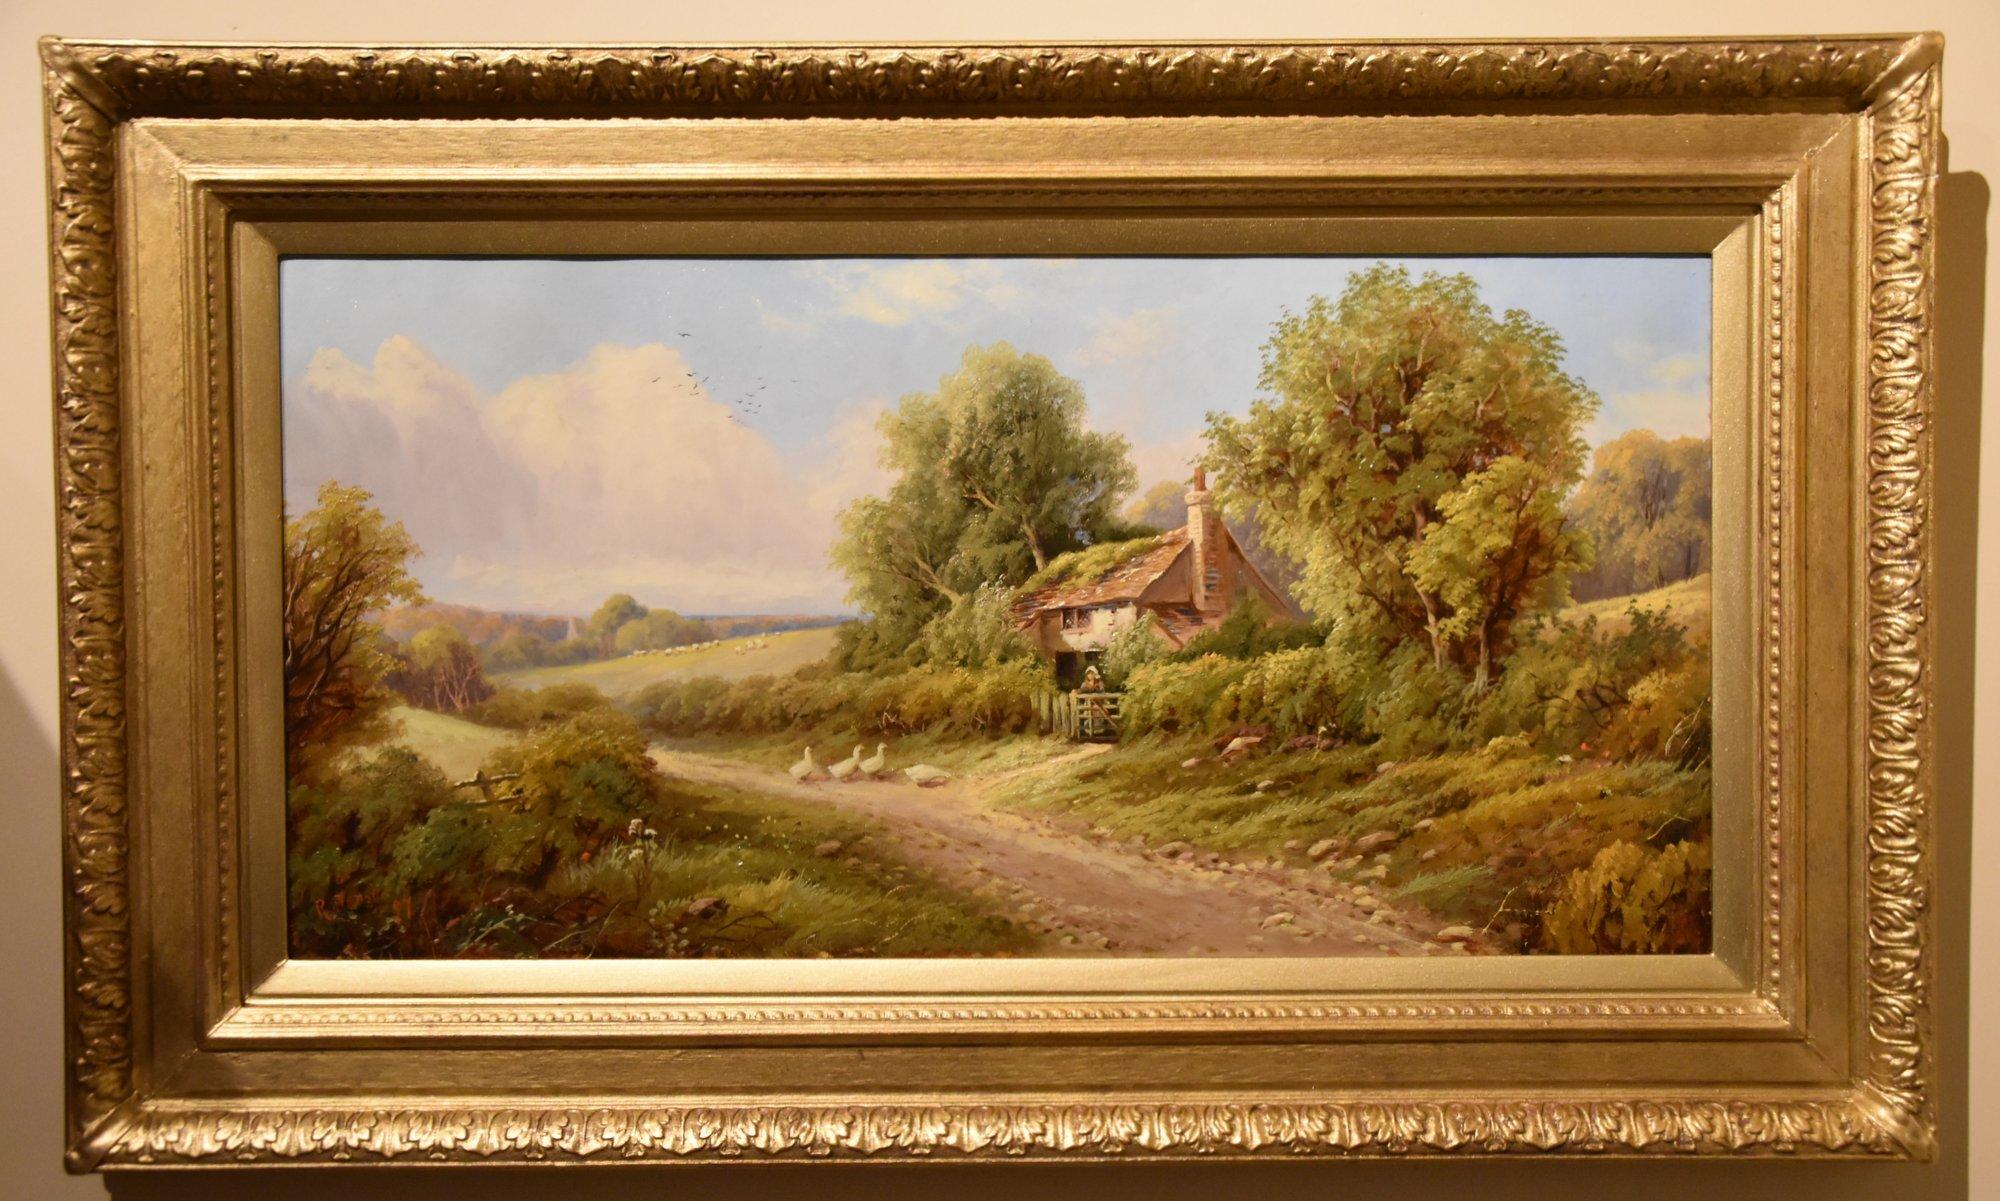 Oil Painting by Robin Fenson "A Cottage View" Pseudonym for Henry Maidment an Islington painter of country landscapes. Oil on card. Signed and dated 1897 with original frame.

Dimensions unframed 14 x 18 inches
Dimensions framed 21 x 25 inches

All